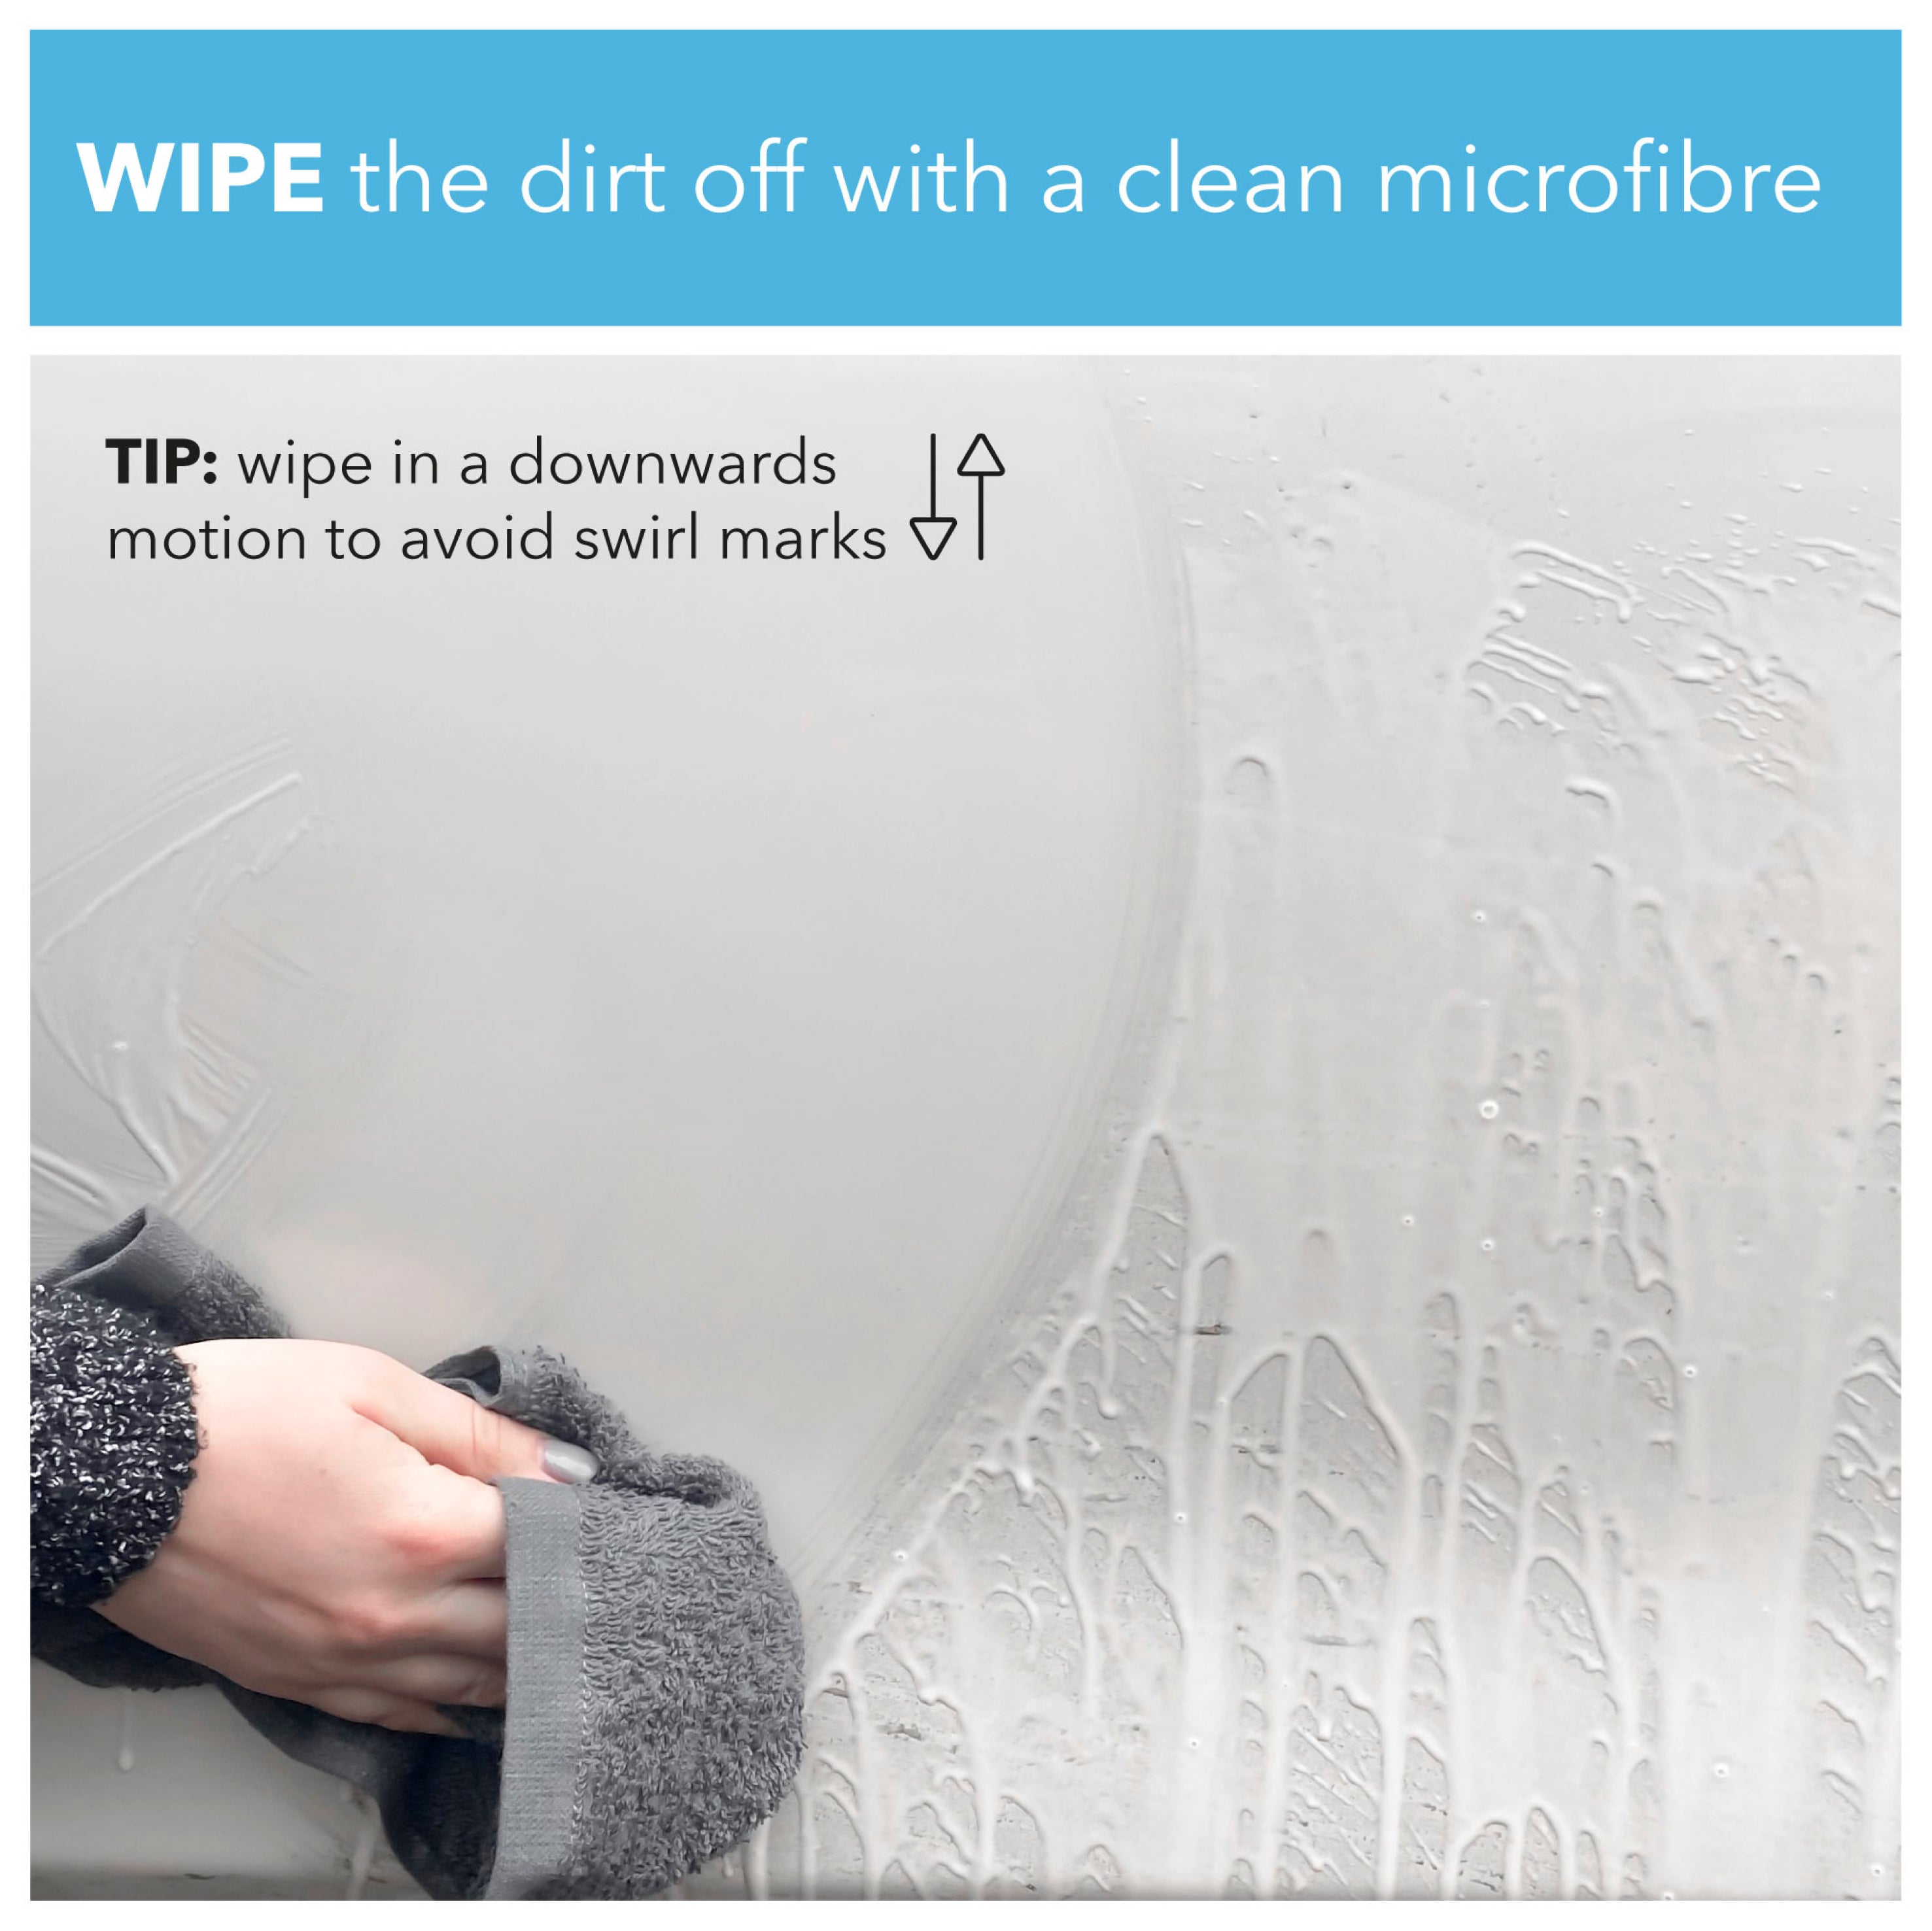 wipe the dirt off with a clean microfibre cloth